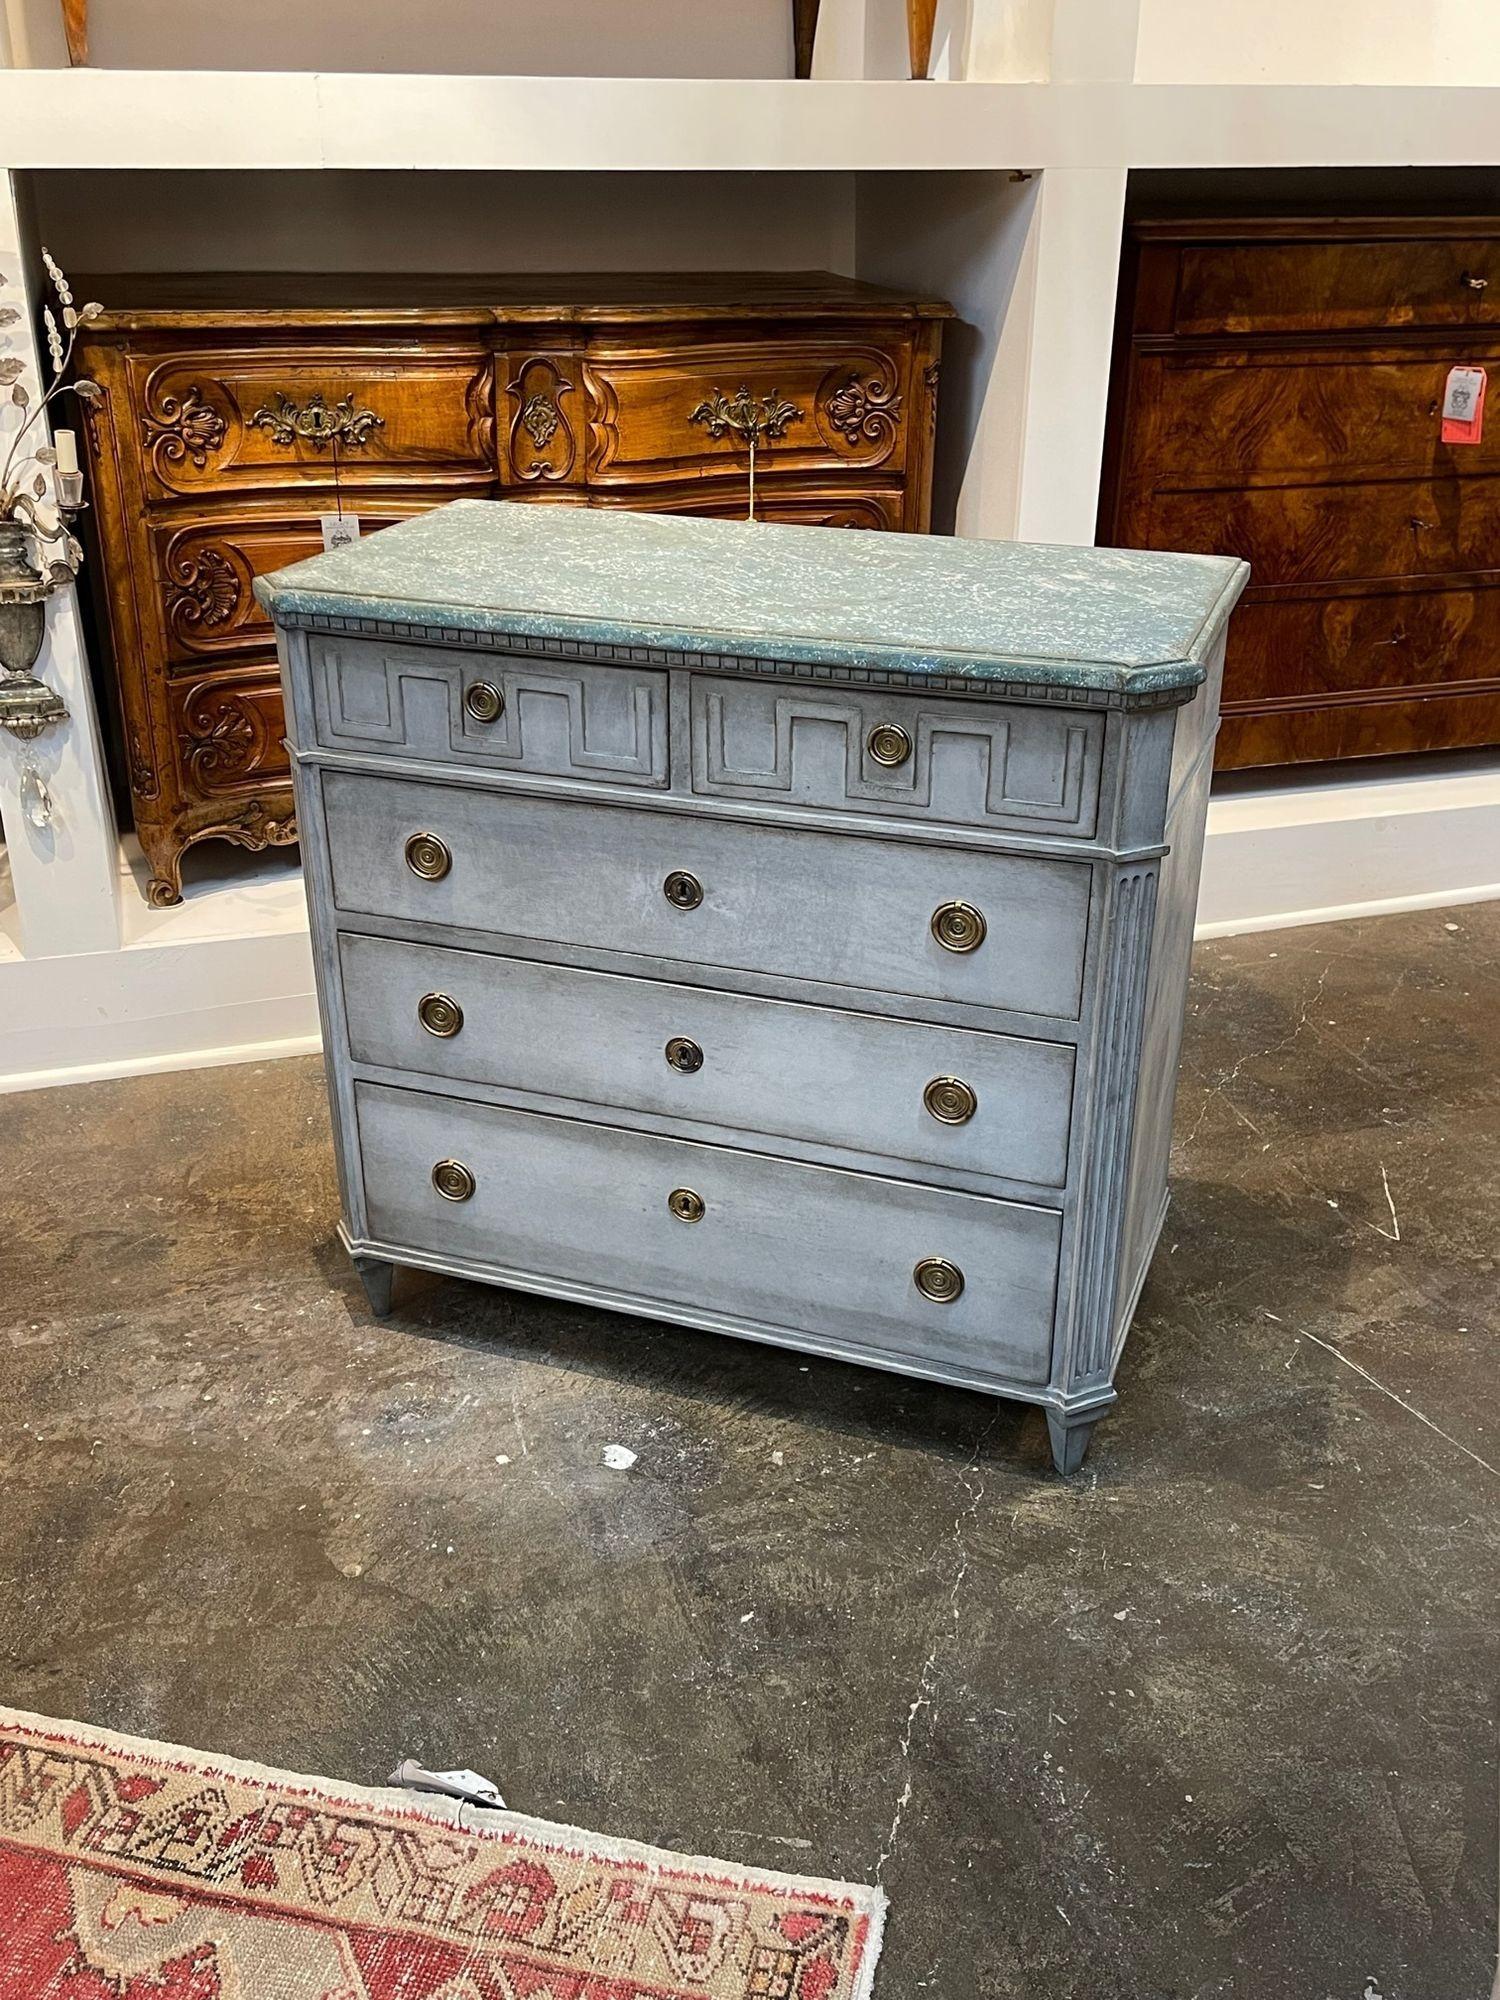 Lovely 19th century Swedish carved and painted chest with Greek Key pattern. Featuring a beautiful patina including a green painted top and 4 drawers for storage. So pretty!!